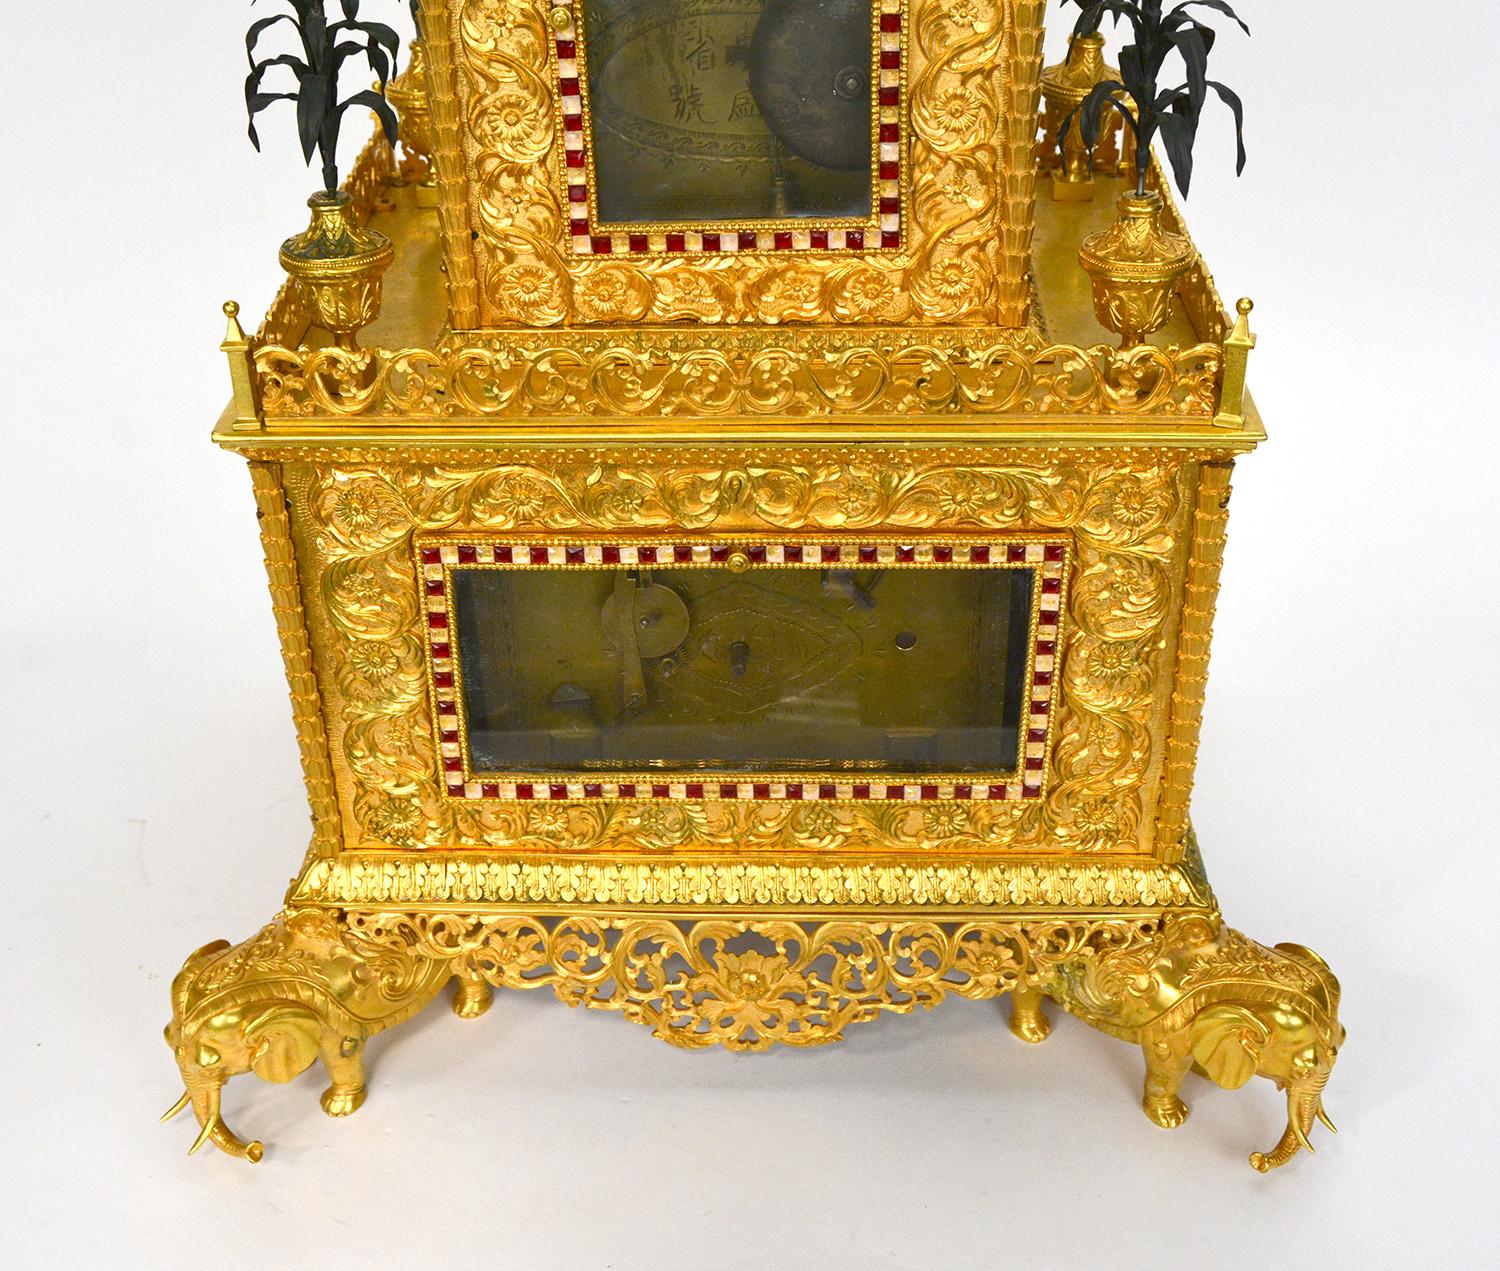 Massive Chinese Ormolu High Relief Gilt Bronze Automaton Musical Clock For Sale 11